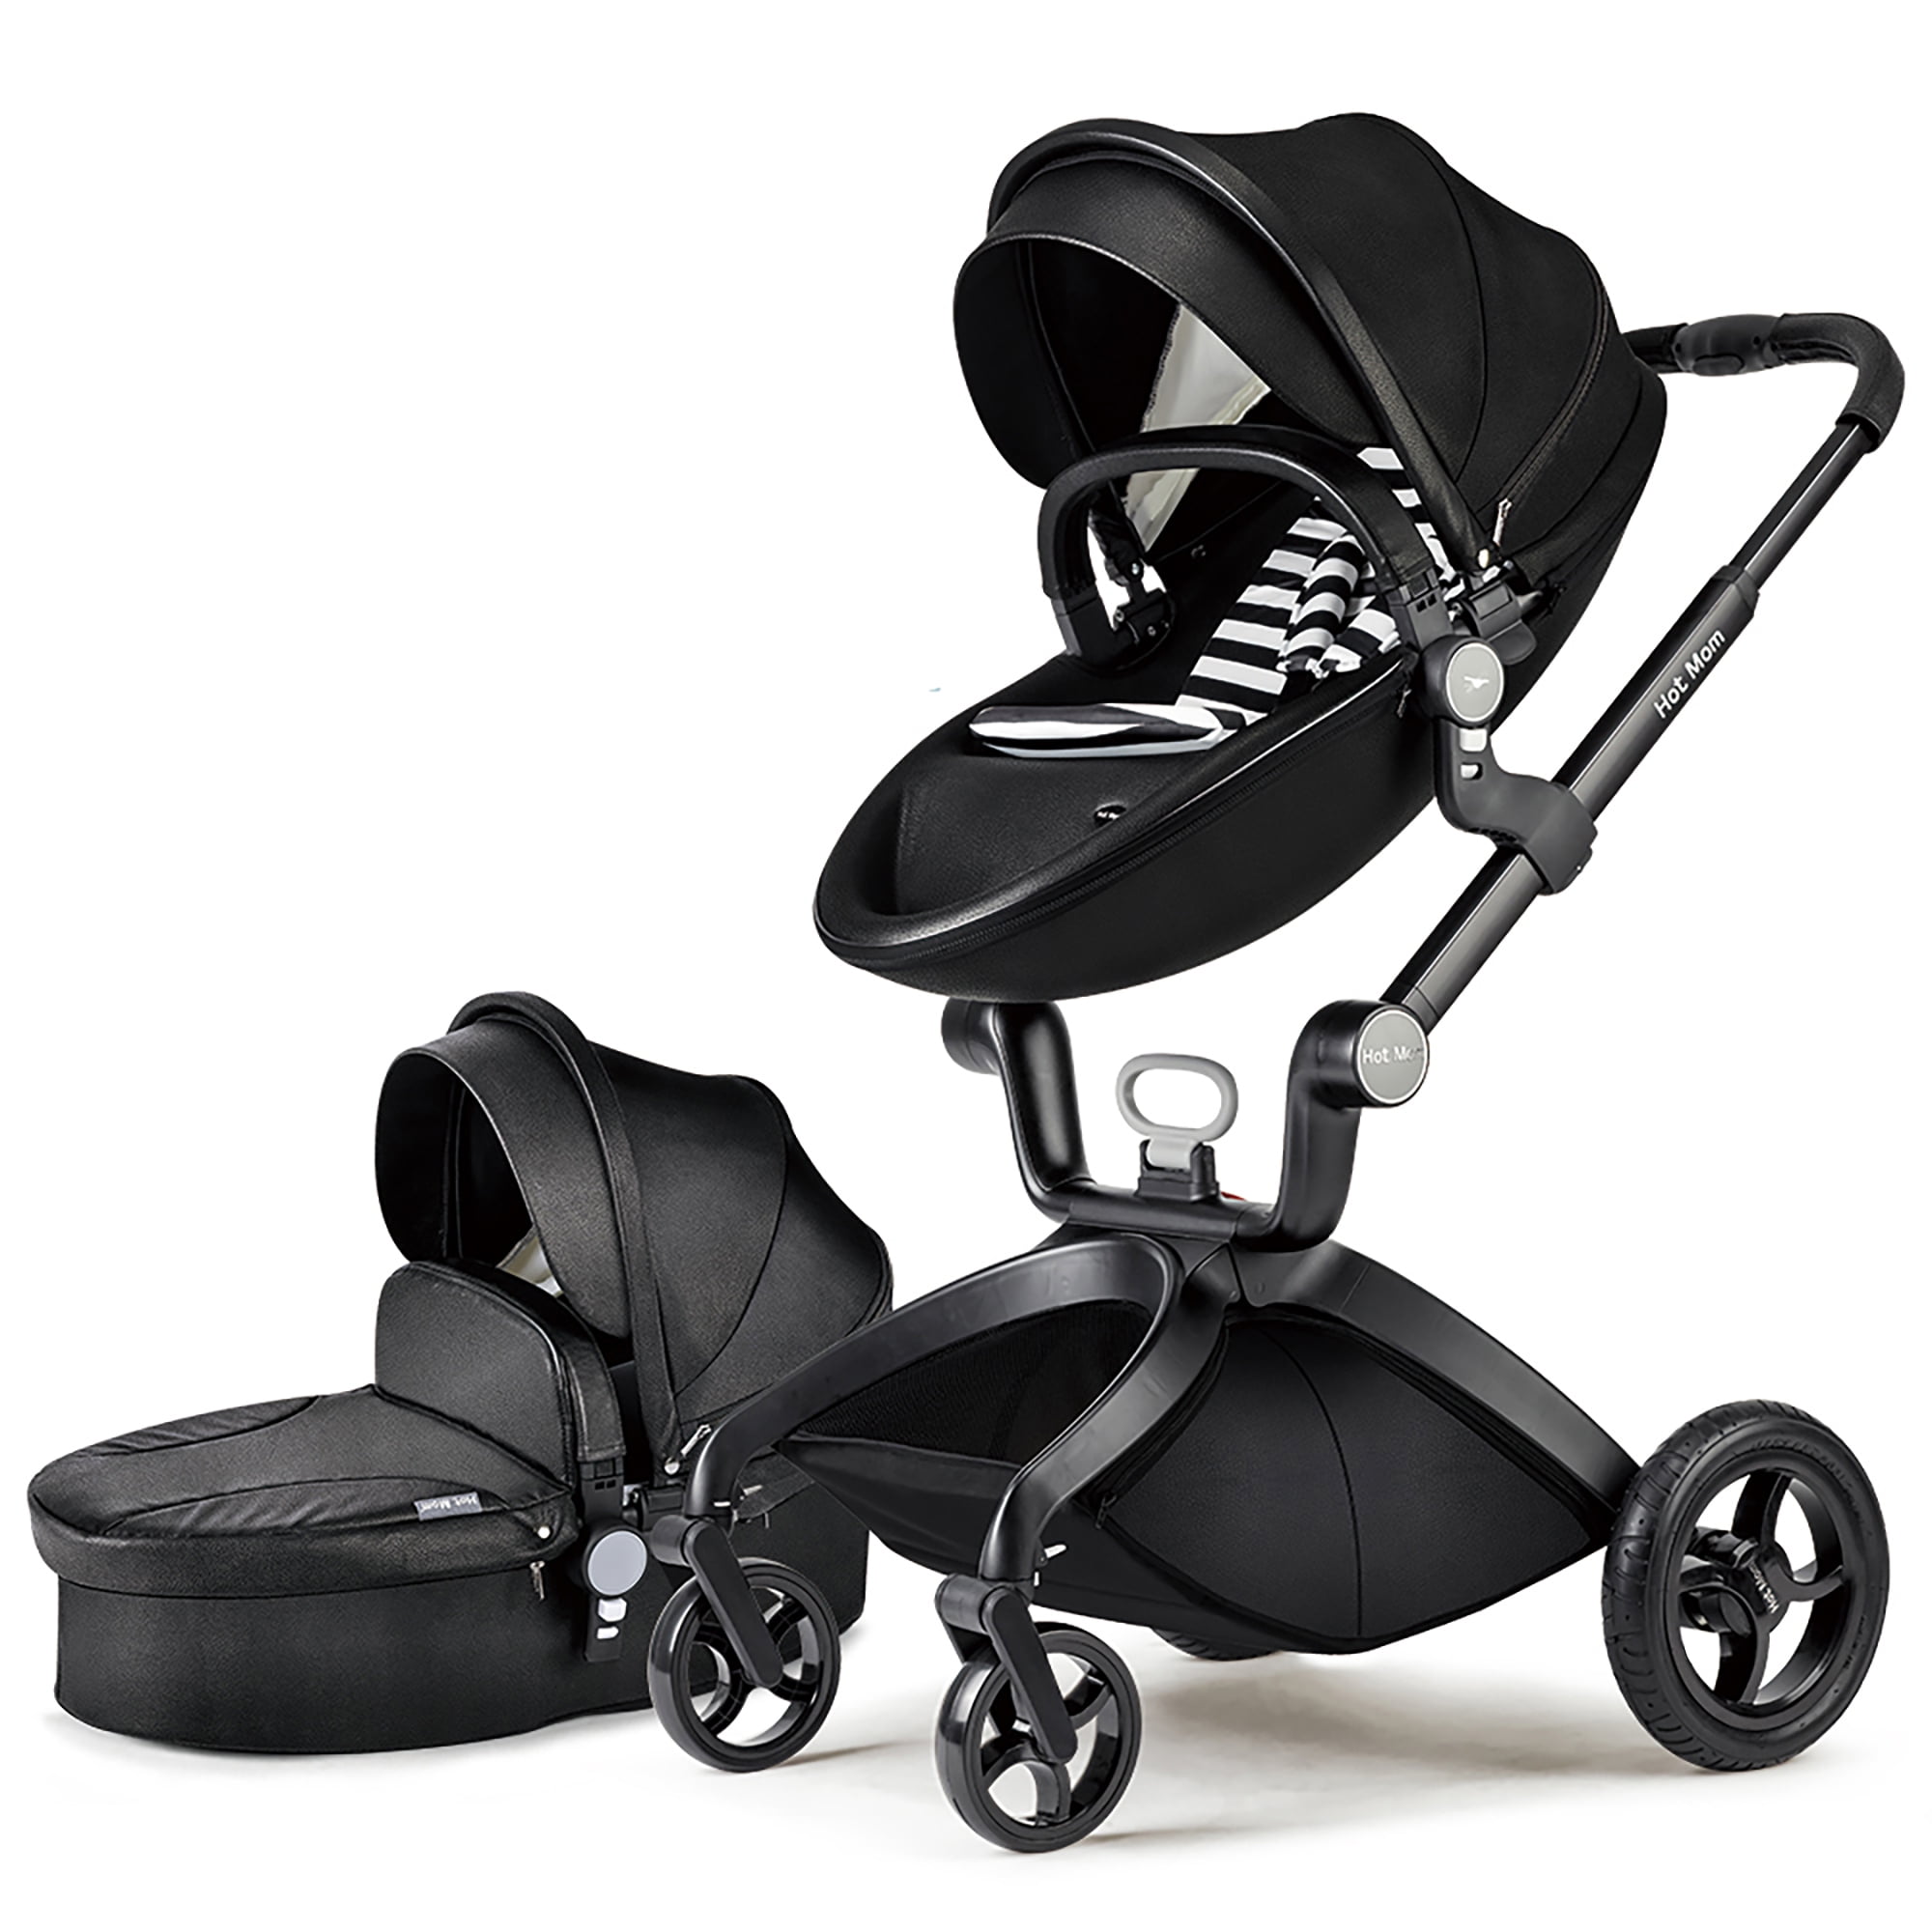 LUXURY baby stroller foldable jogger Carriage Infant Travel system PU pushchair 